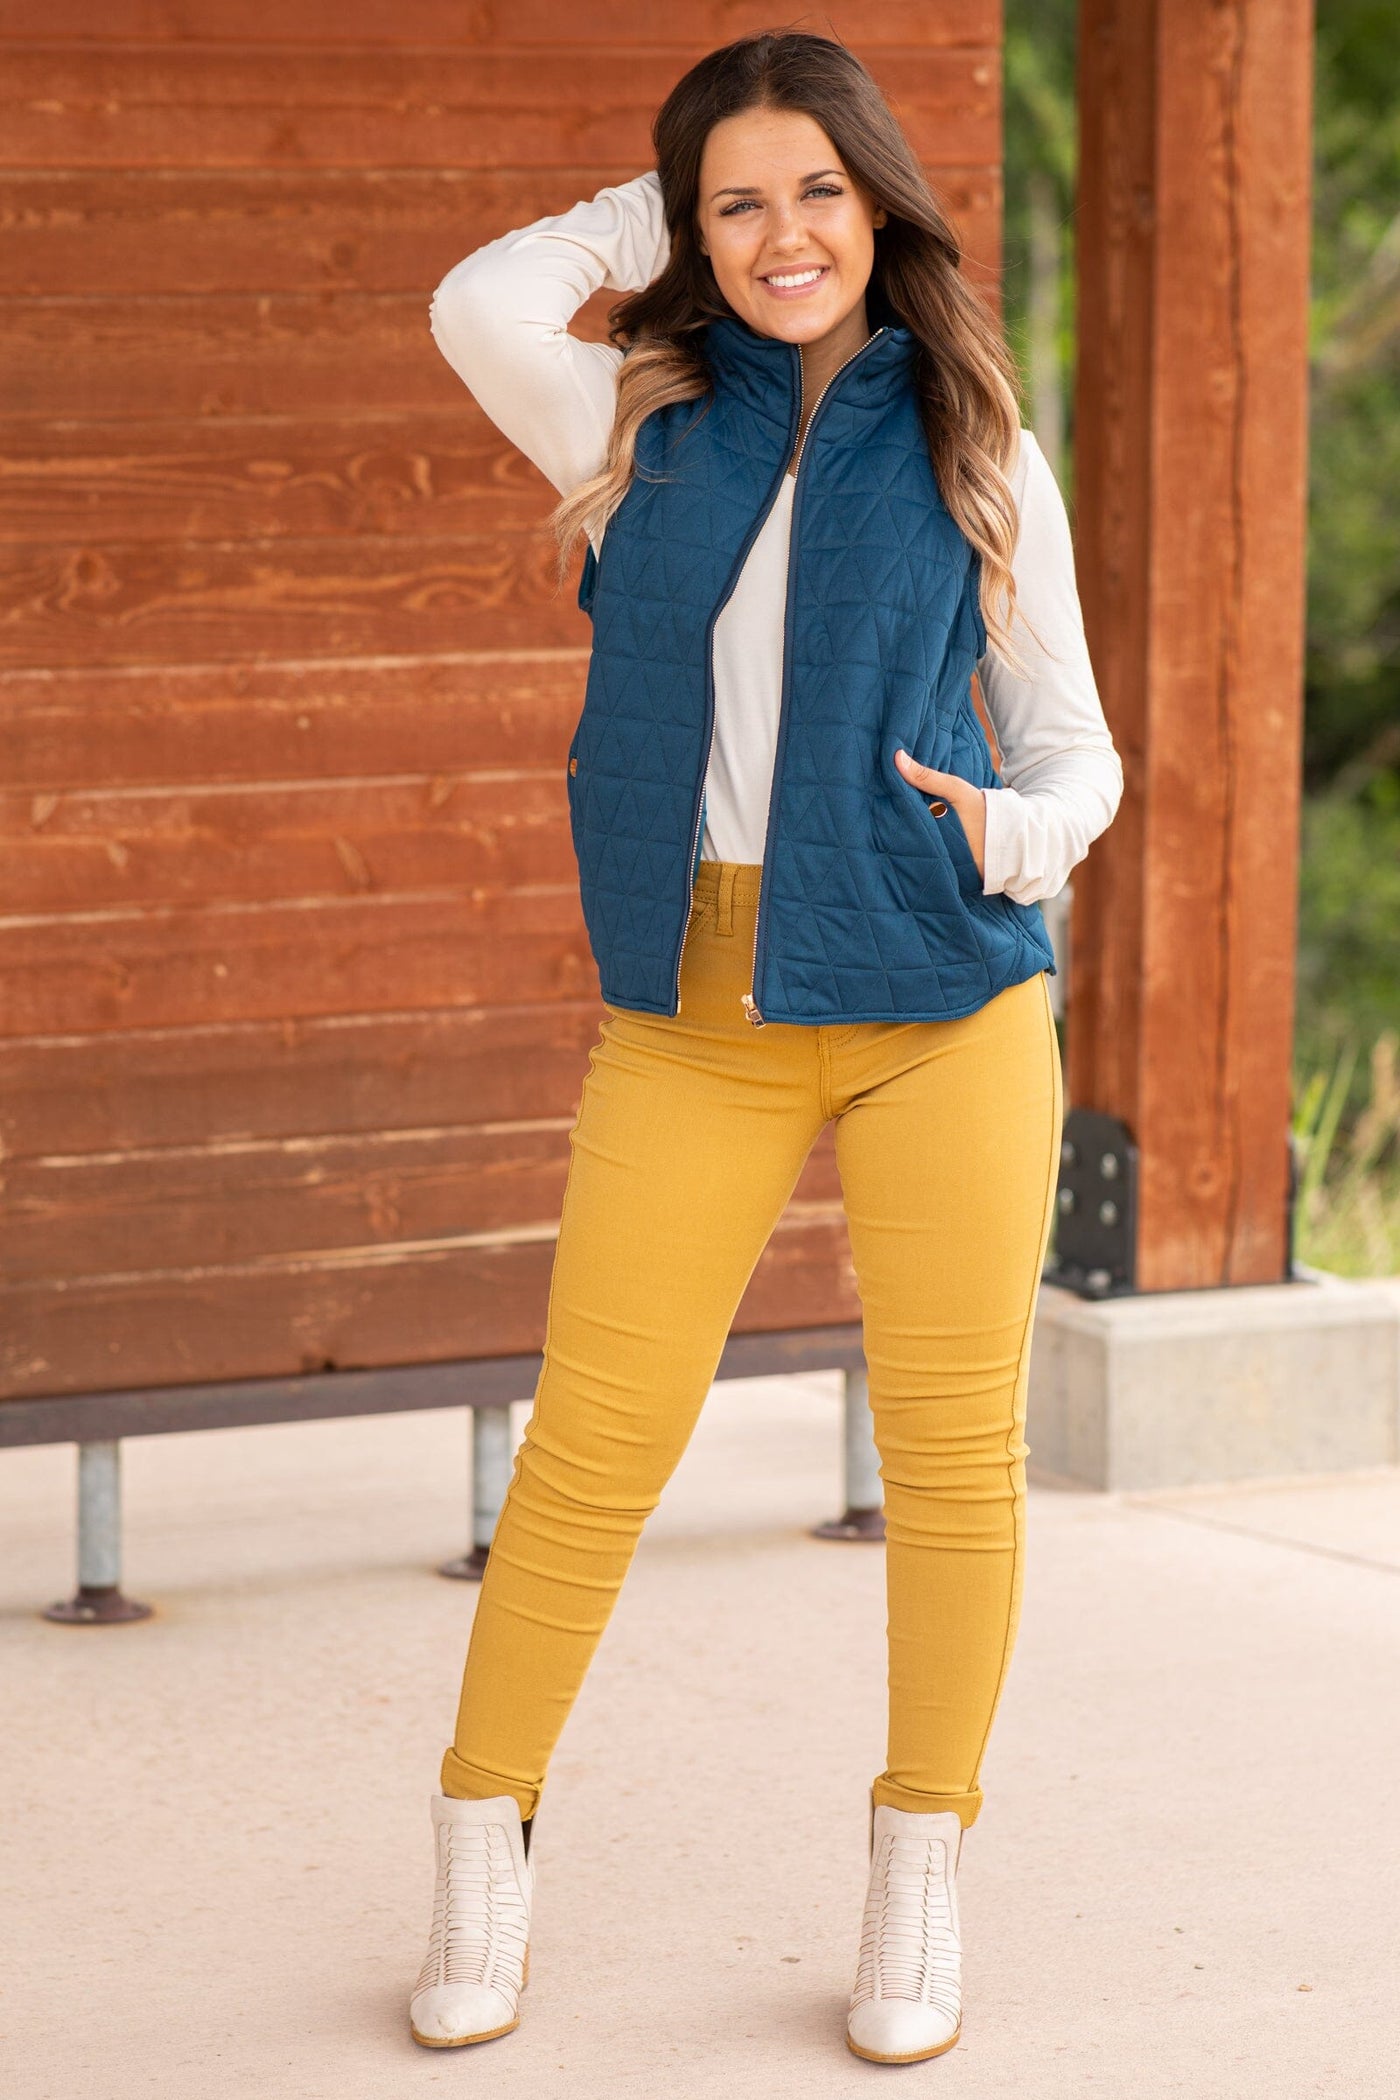 Teal Quilted Vest - Filly Flair